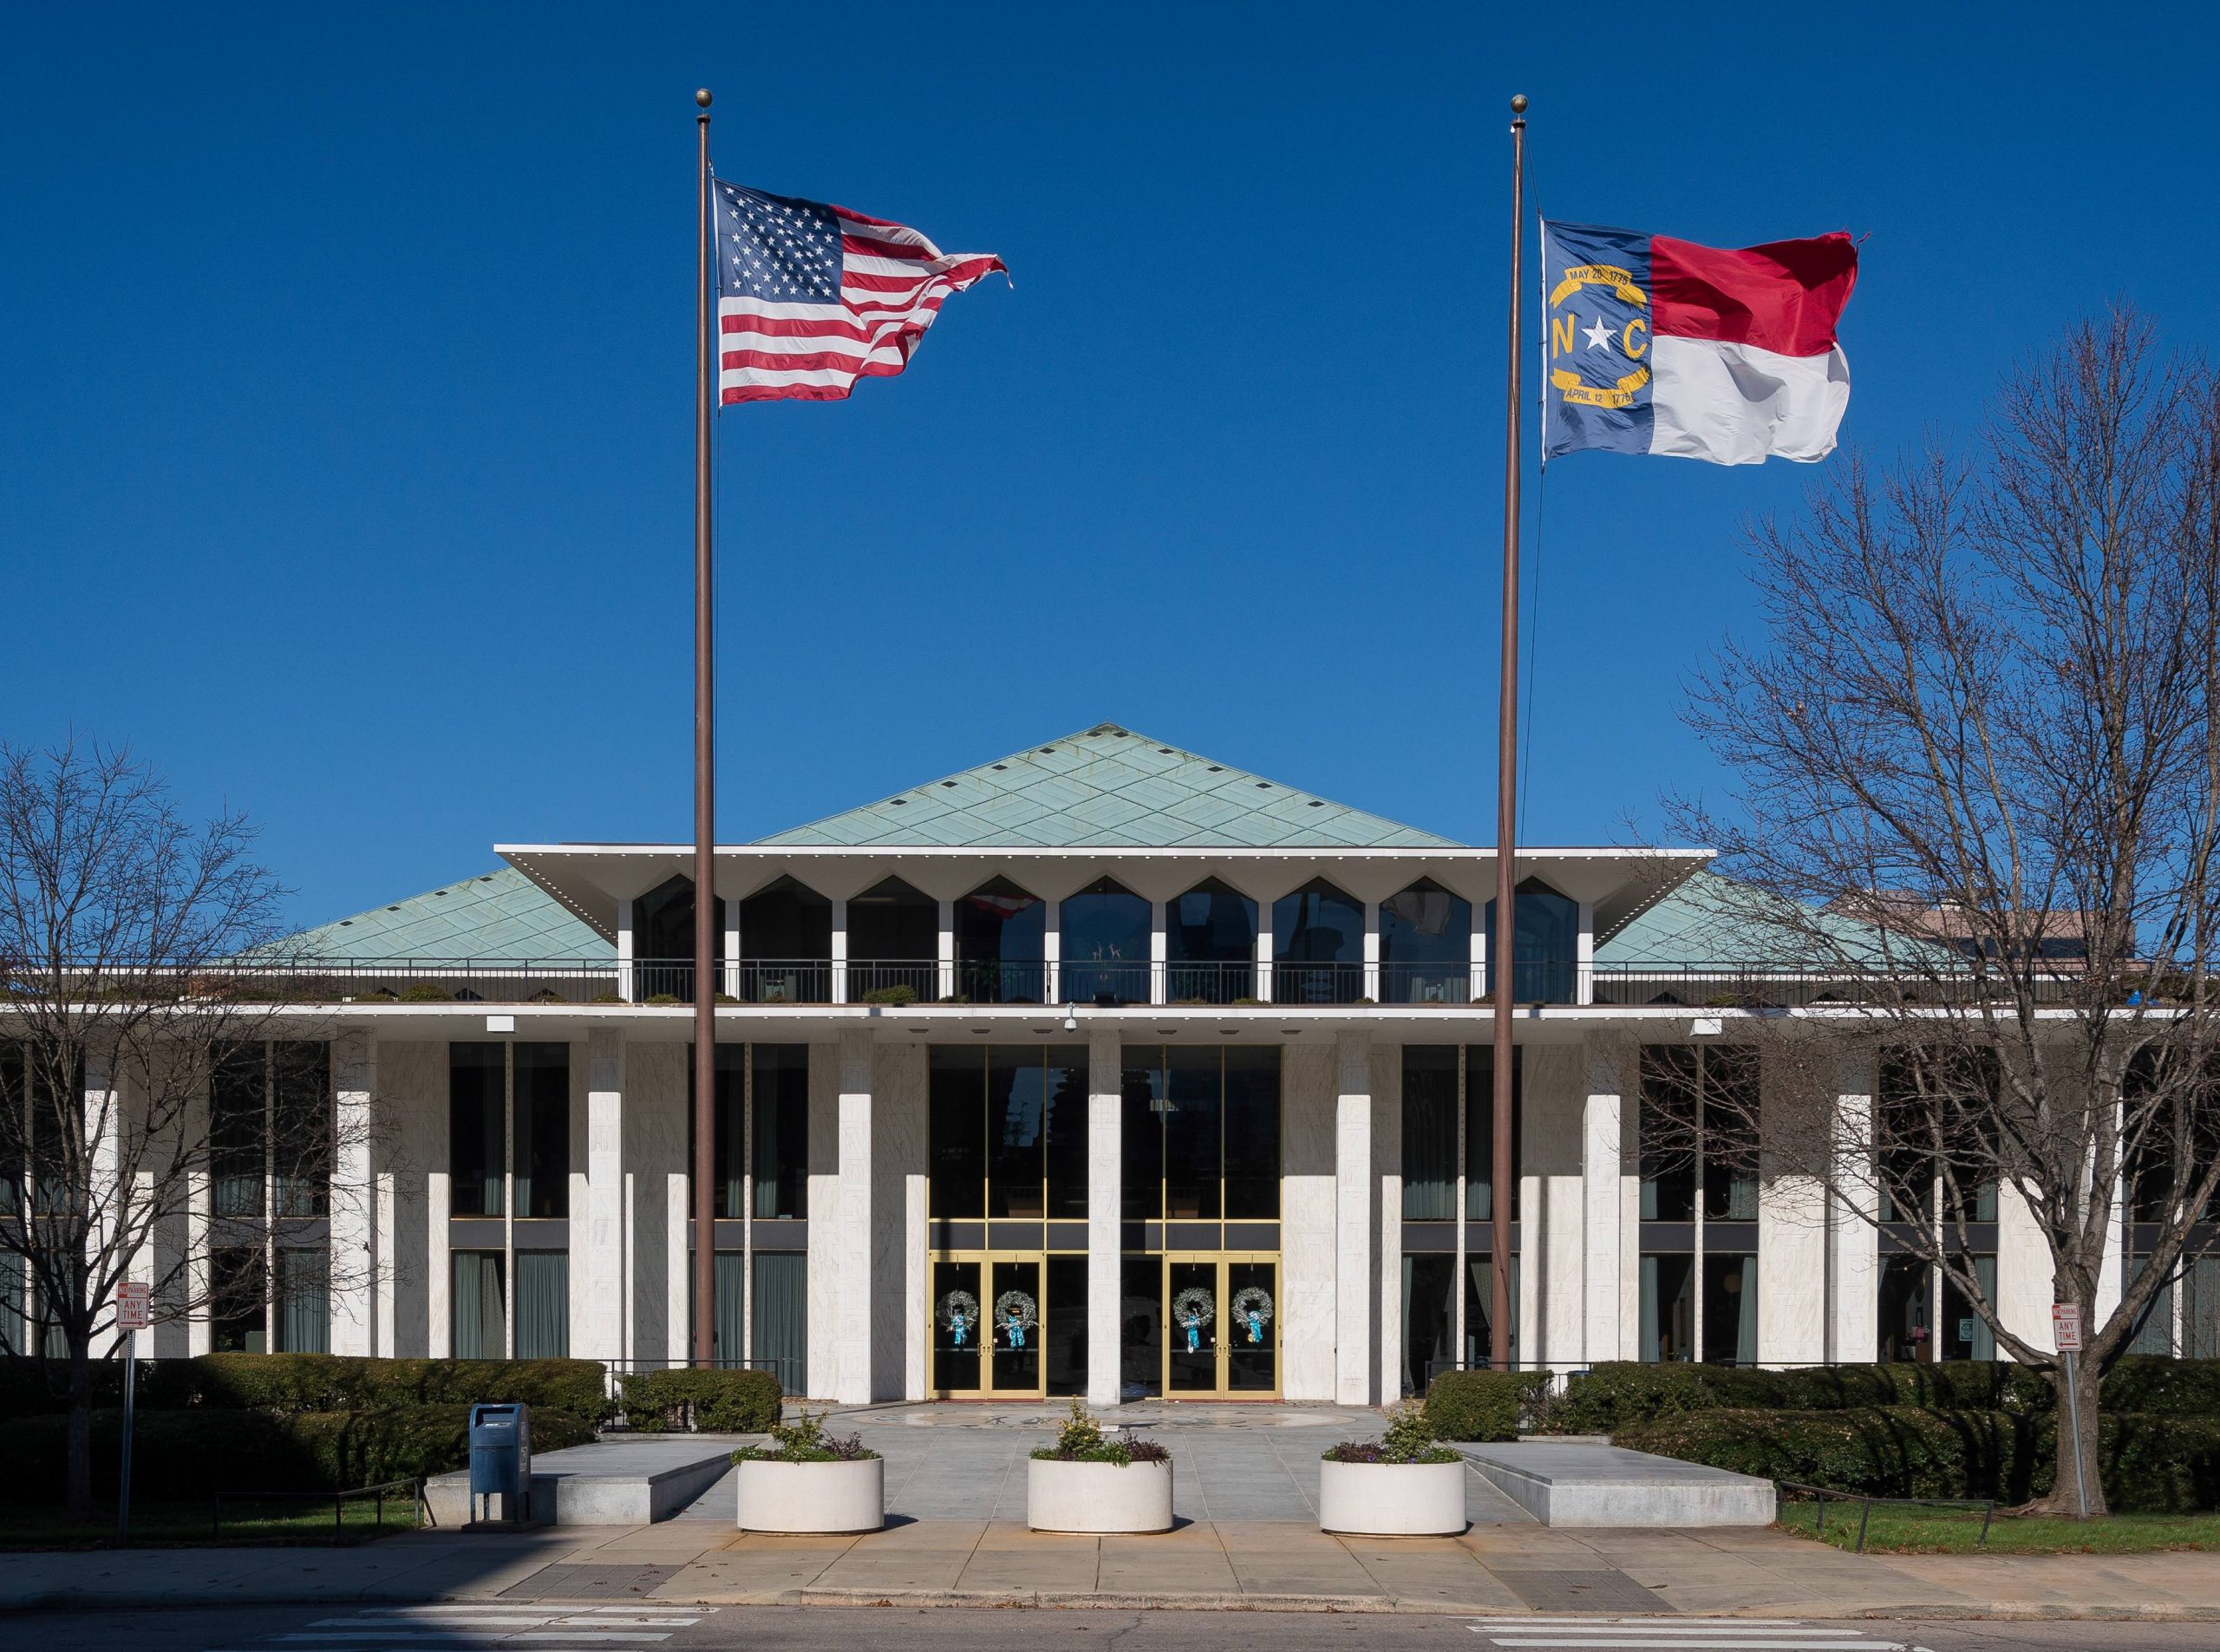 US and North Carolina flags flying in front of the North Carolina legislative building